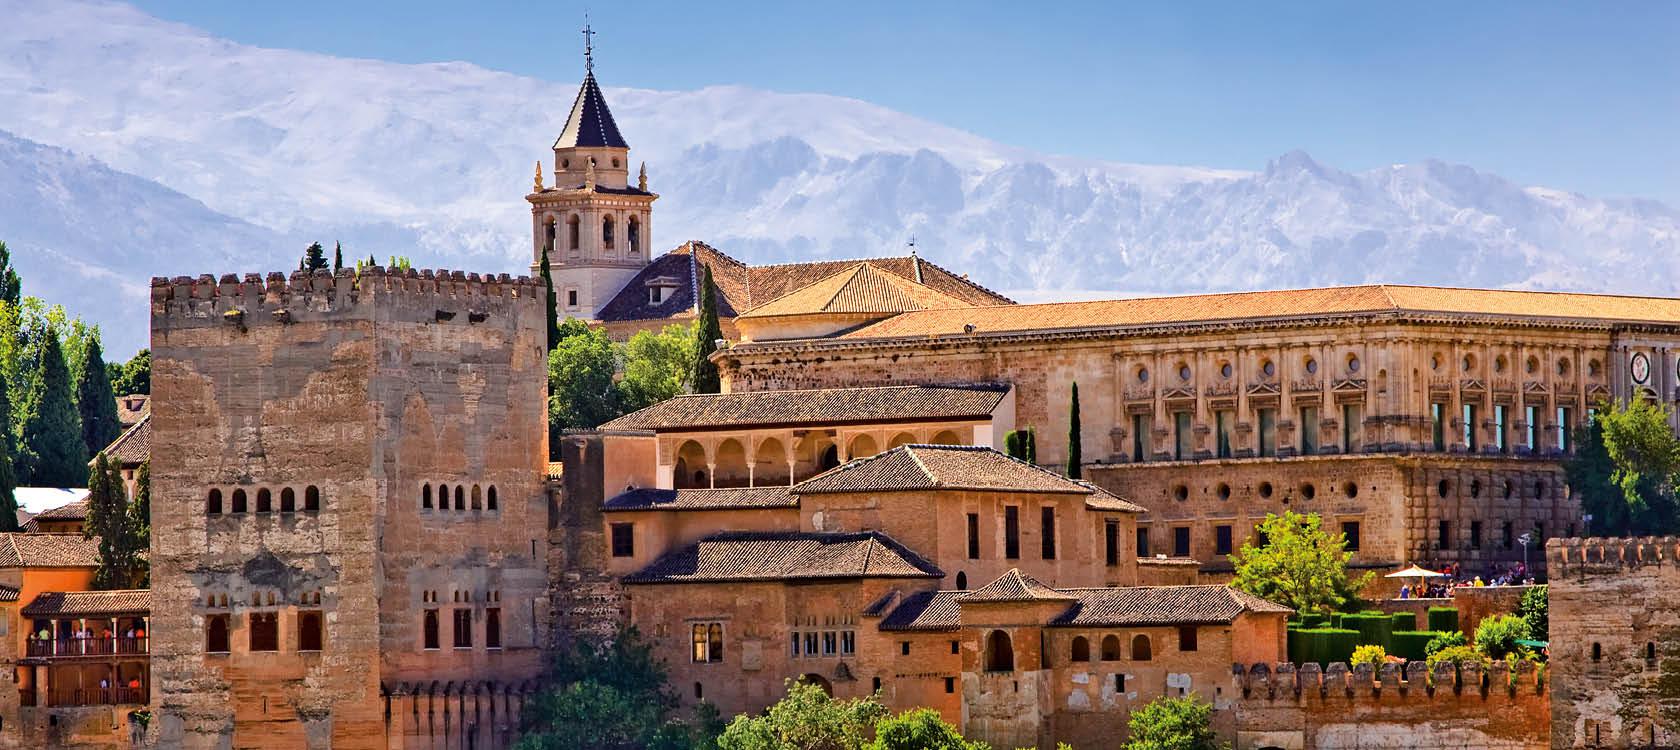 Alhambra i Andalusien, Spanien